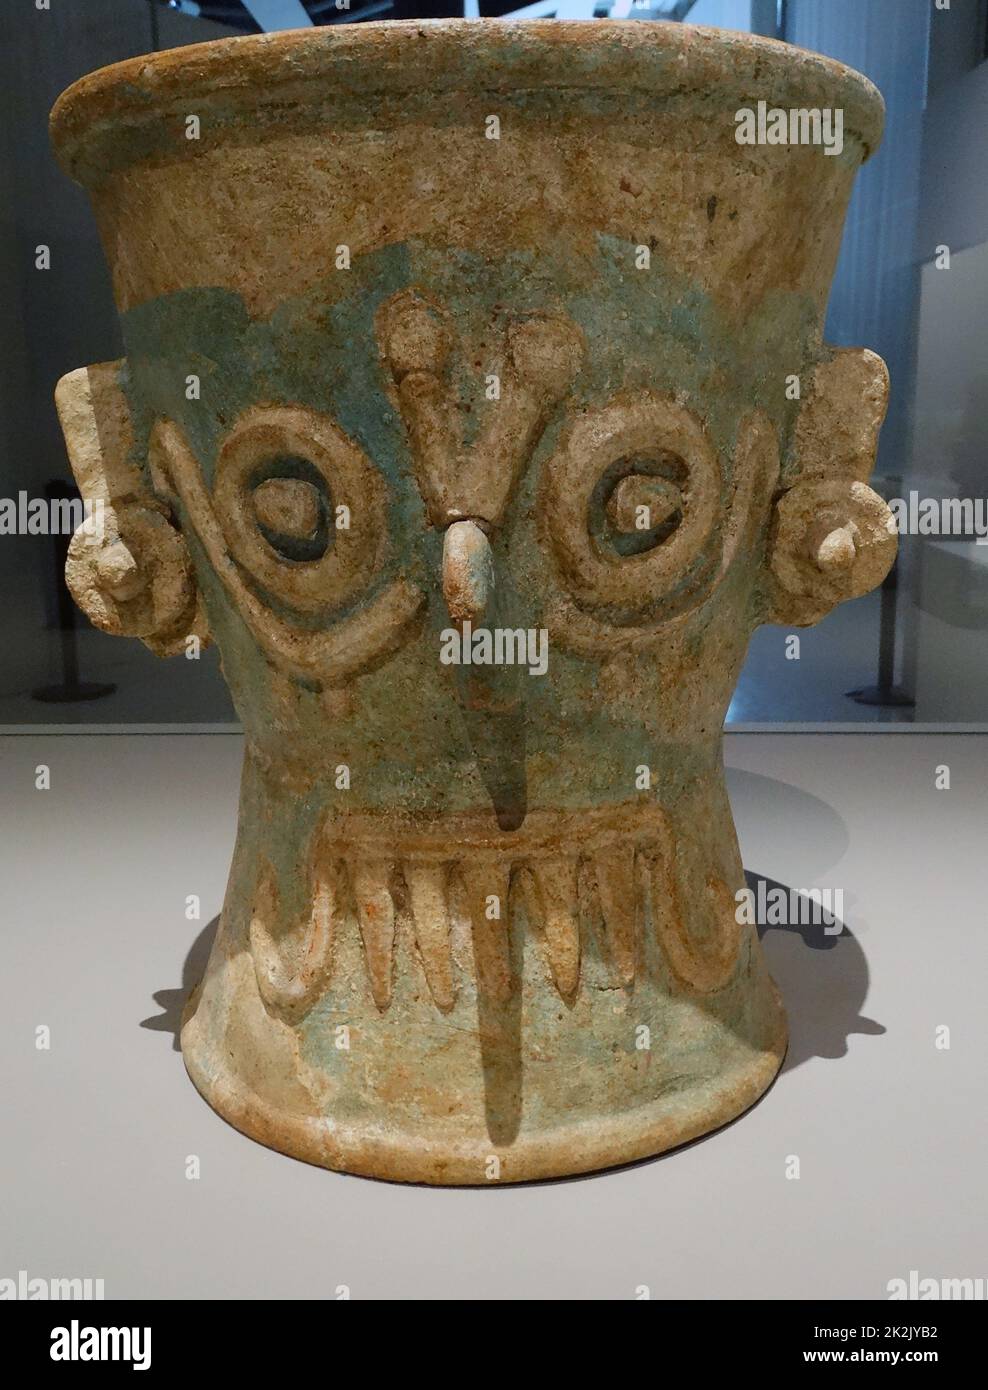 Ceramic incense holder with effigy of the Mayan rain deity, Chaac, Yucatan, Mexico. Dated 1250-1550 AD. Stock Photo